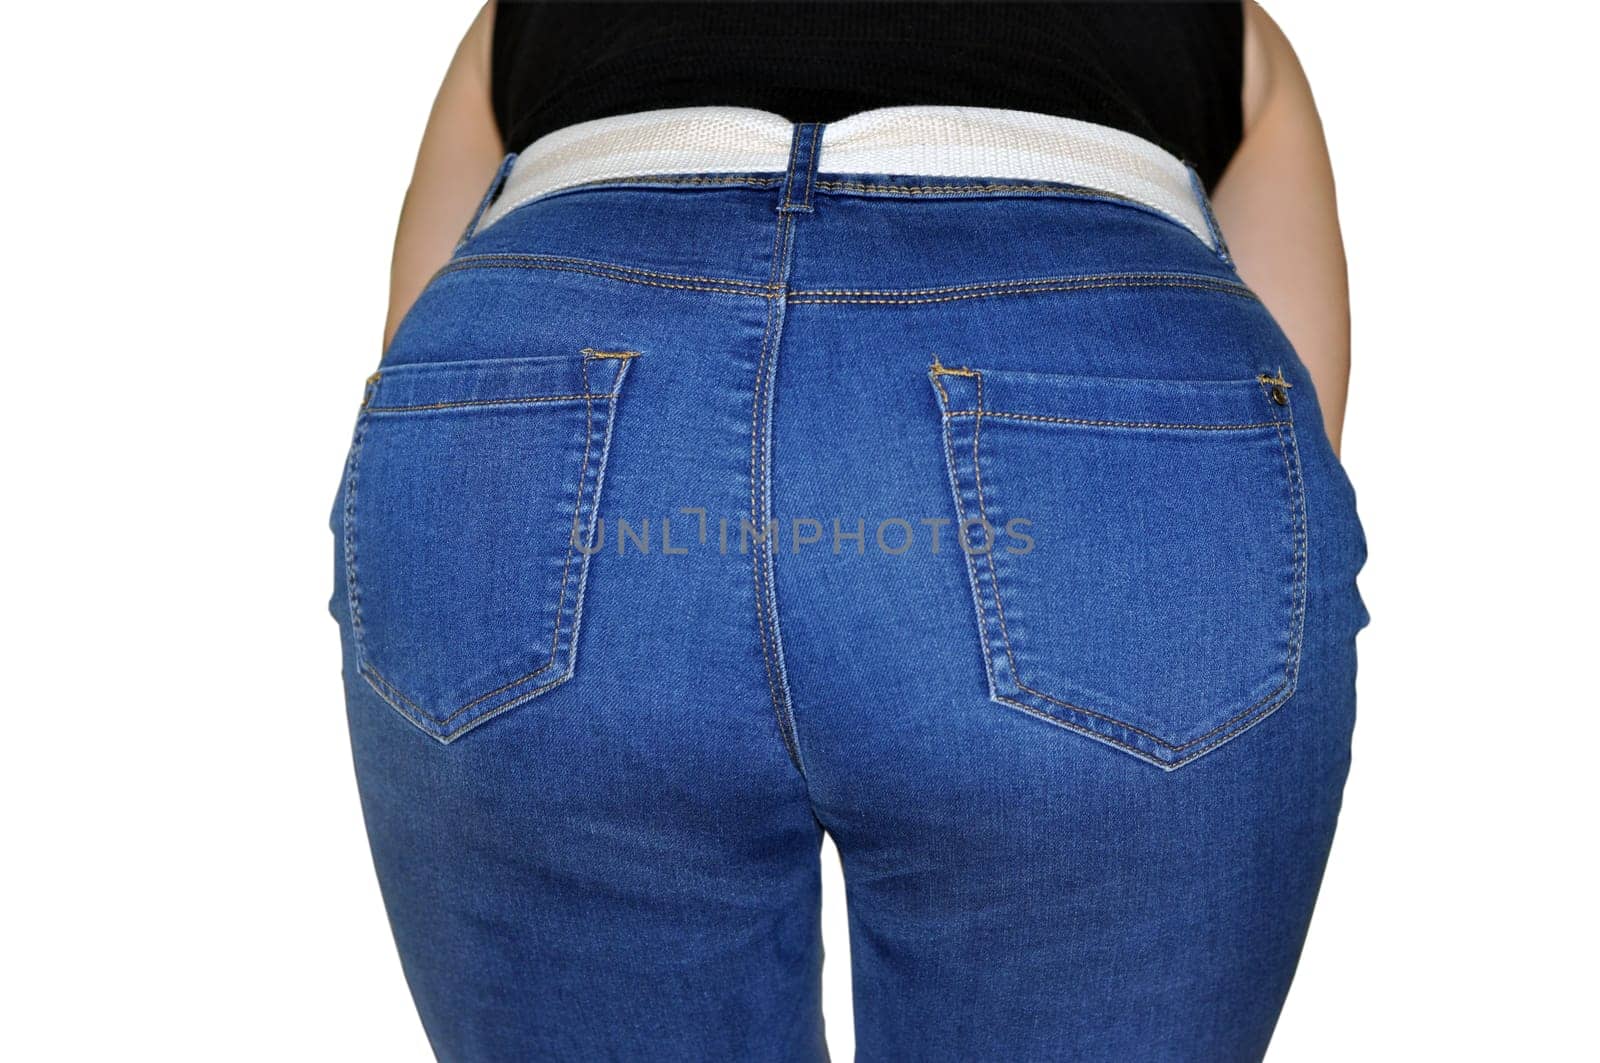 Sexy ass in jeans, sexy clothes ass in pants. Sexy woman wearing of jean pants from back. Woman wearing of jean pants from back. by AliaksaB